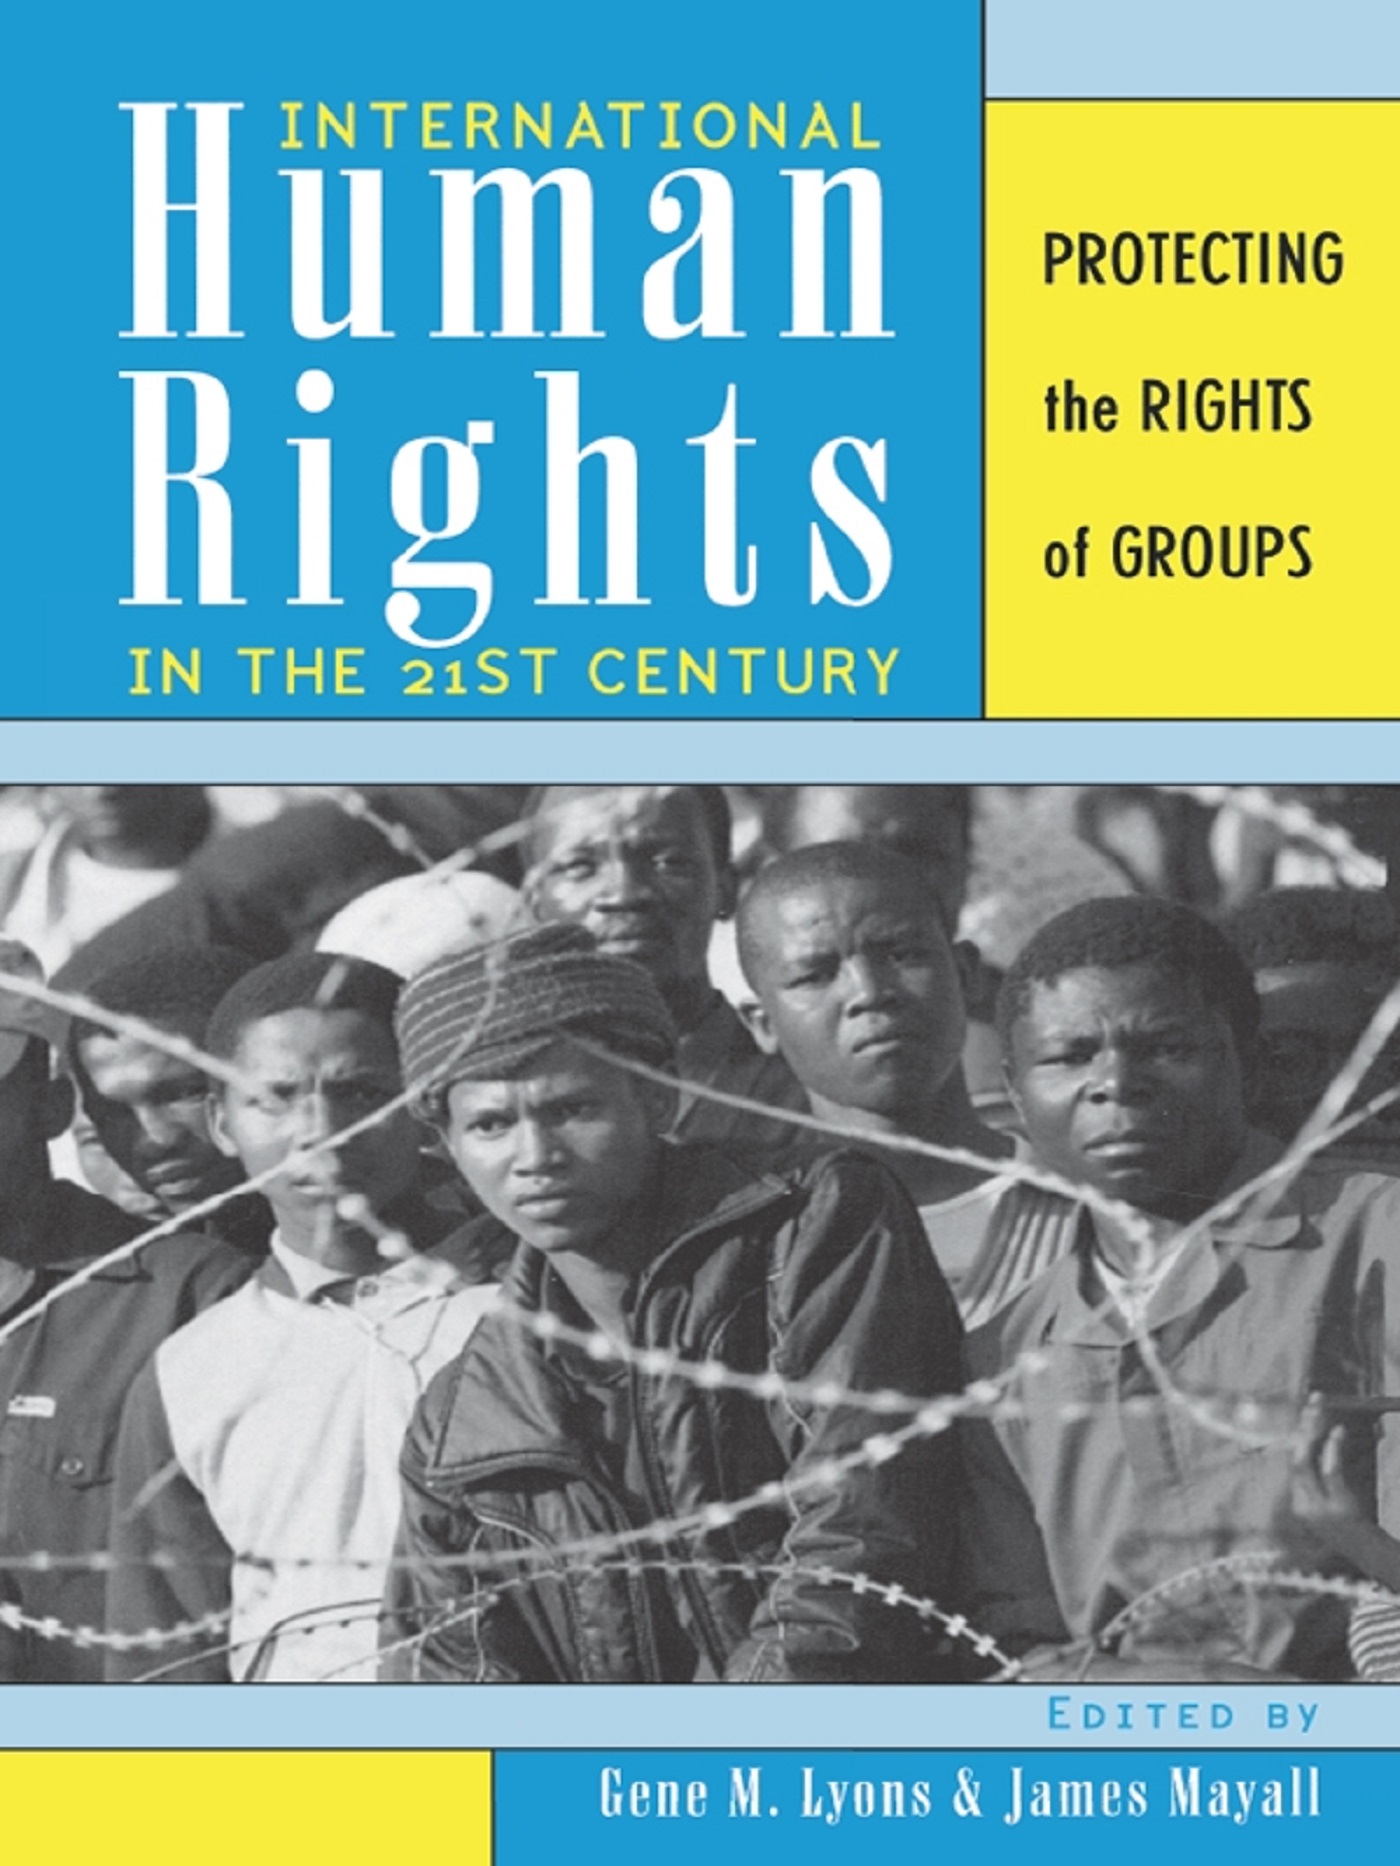 International Human Rights in the 21st Century: Protecting the Rights of Groups